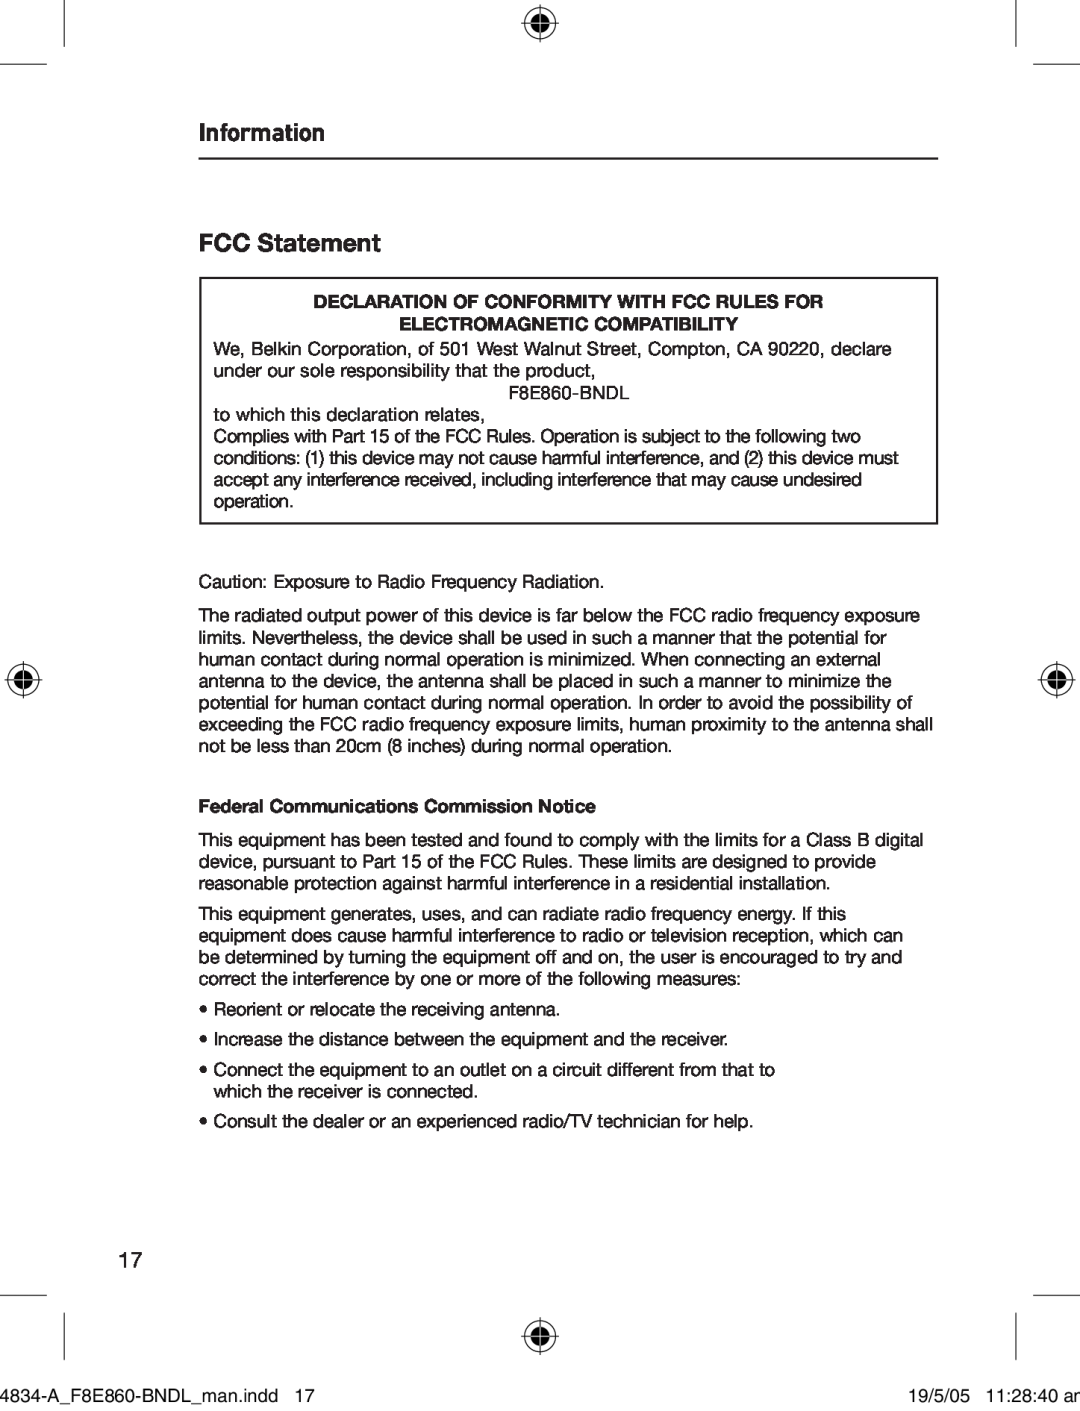 Belkin 280 manual Information FCC Statement, Declaration Of Conformity With Fcc Rules For, Electromagnetic Compatibility 